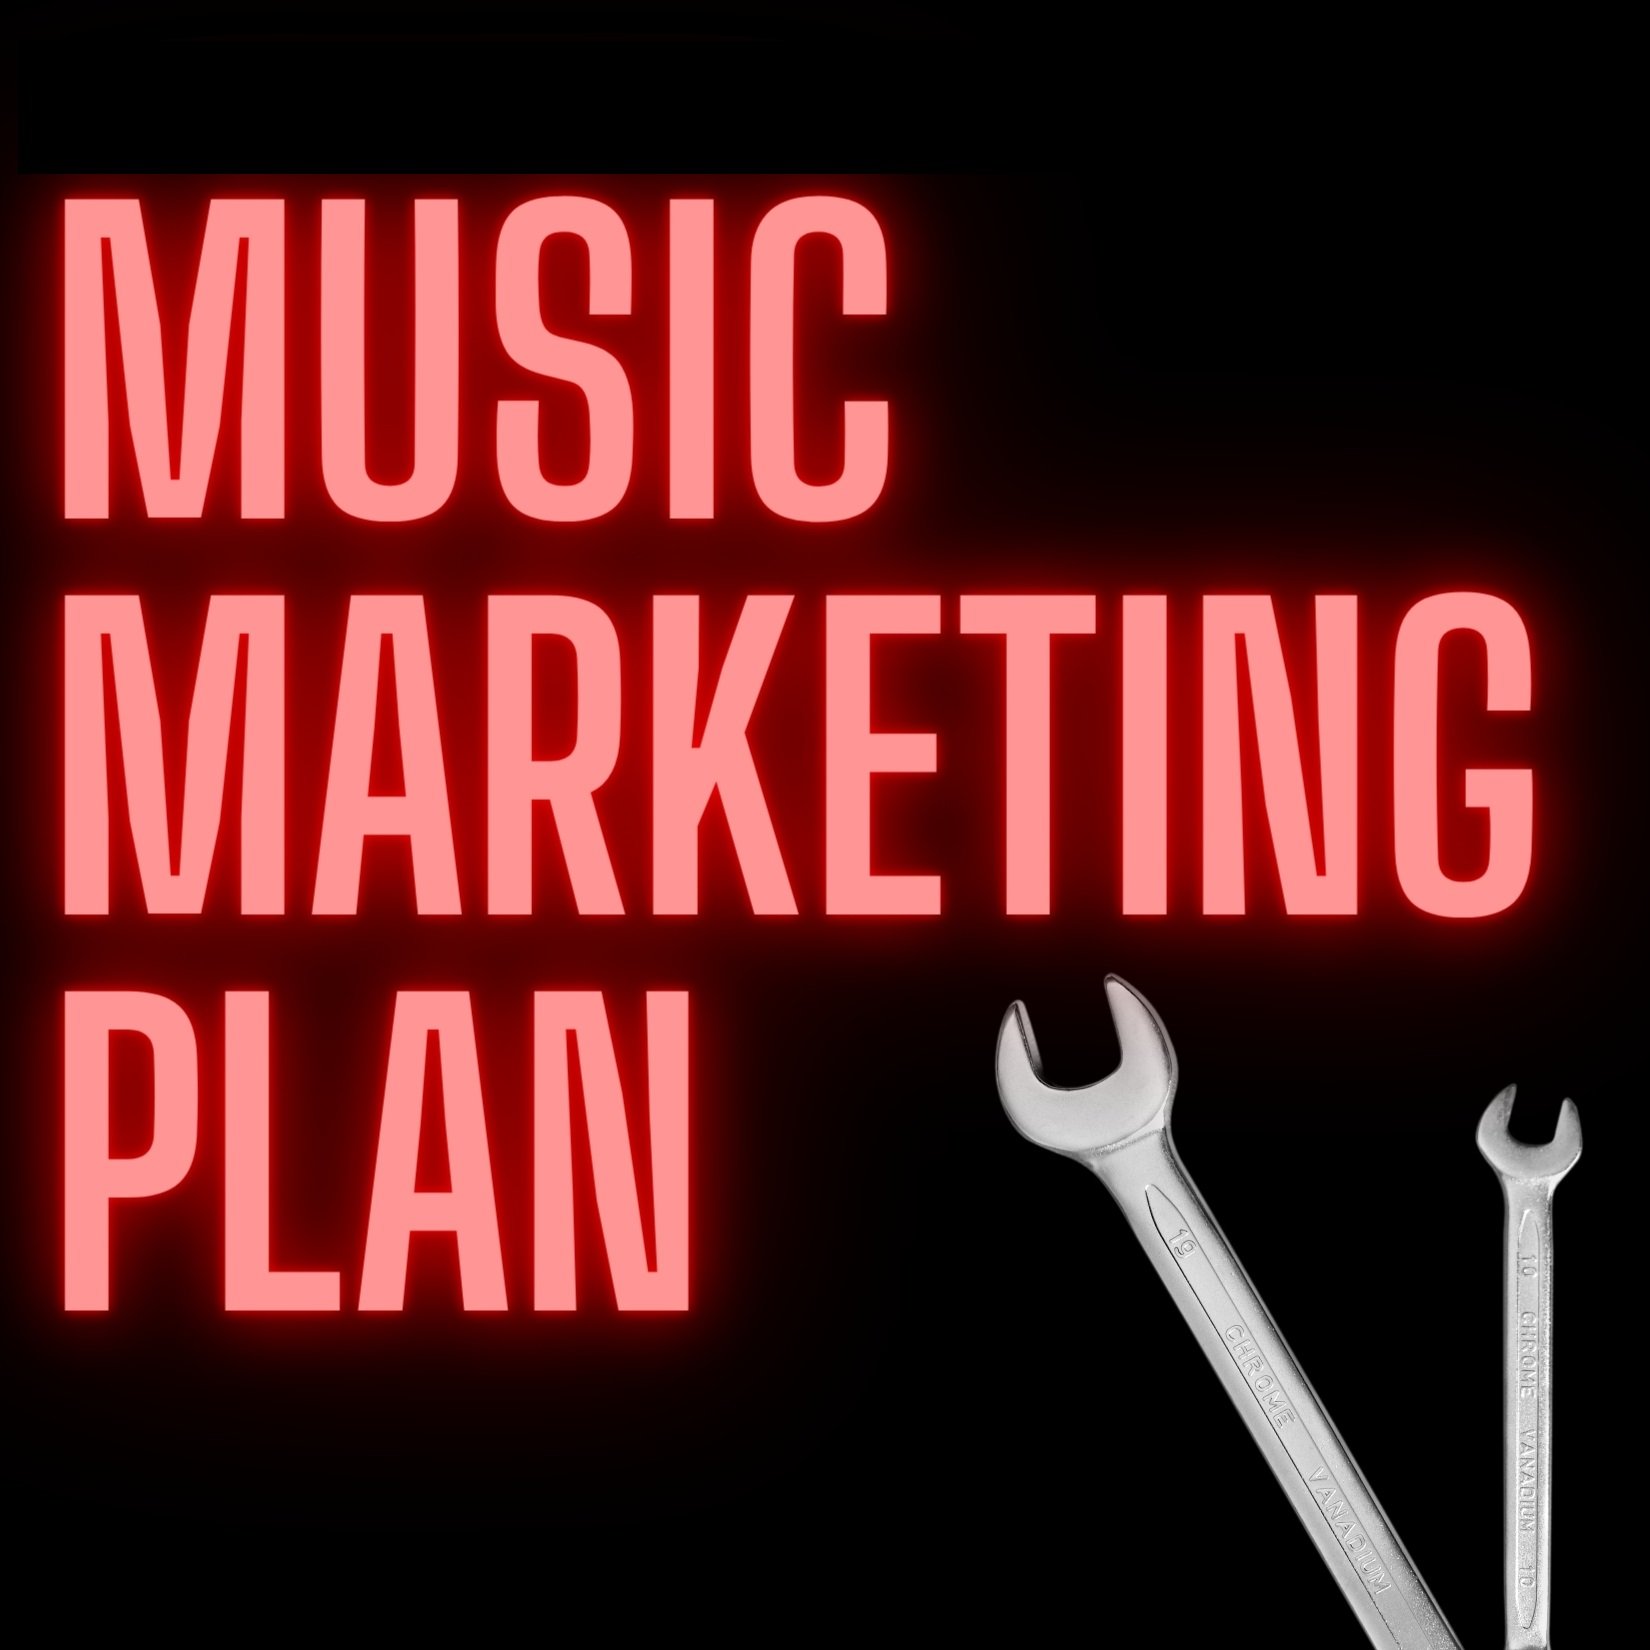 🎵Music Marketing Services★
🎸Satisfaction GUARANTEED
🎯Top Rated Marketing Agency
Go to ➡️ https://t.co/0YVEzYDYAu